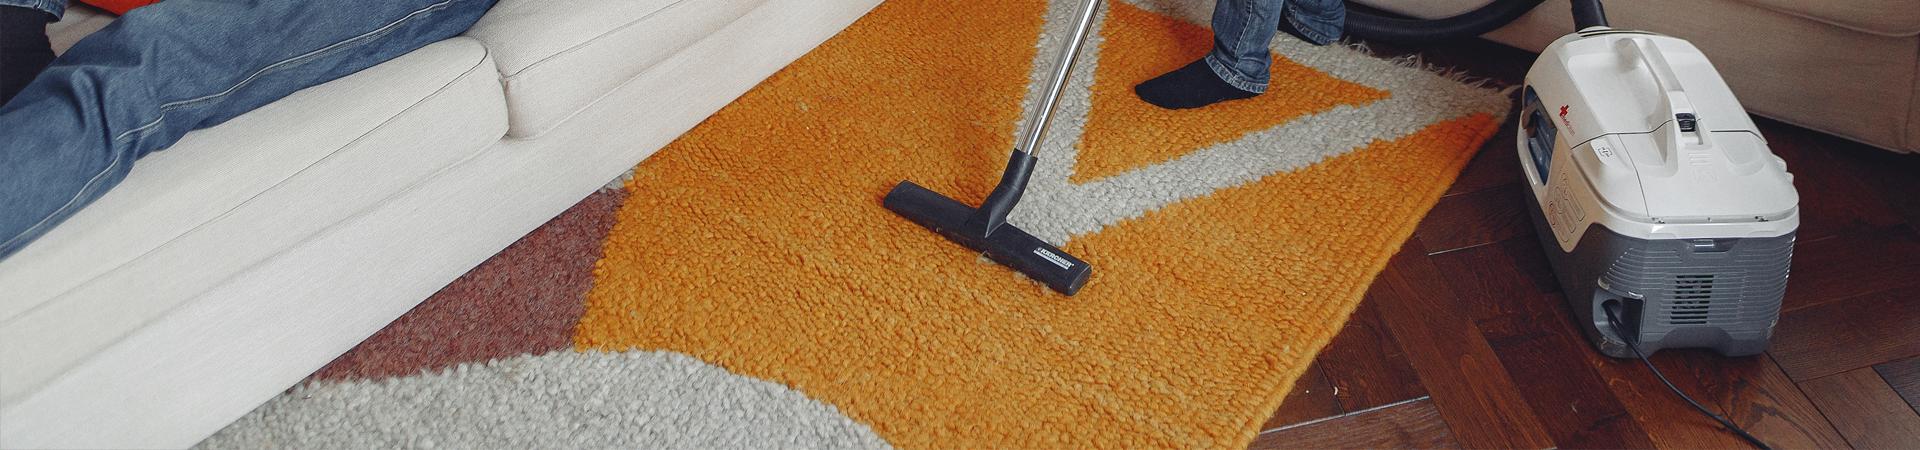 How to select the most suitable carpet cleaner